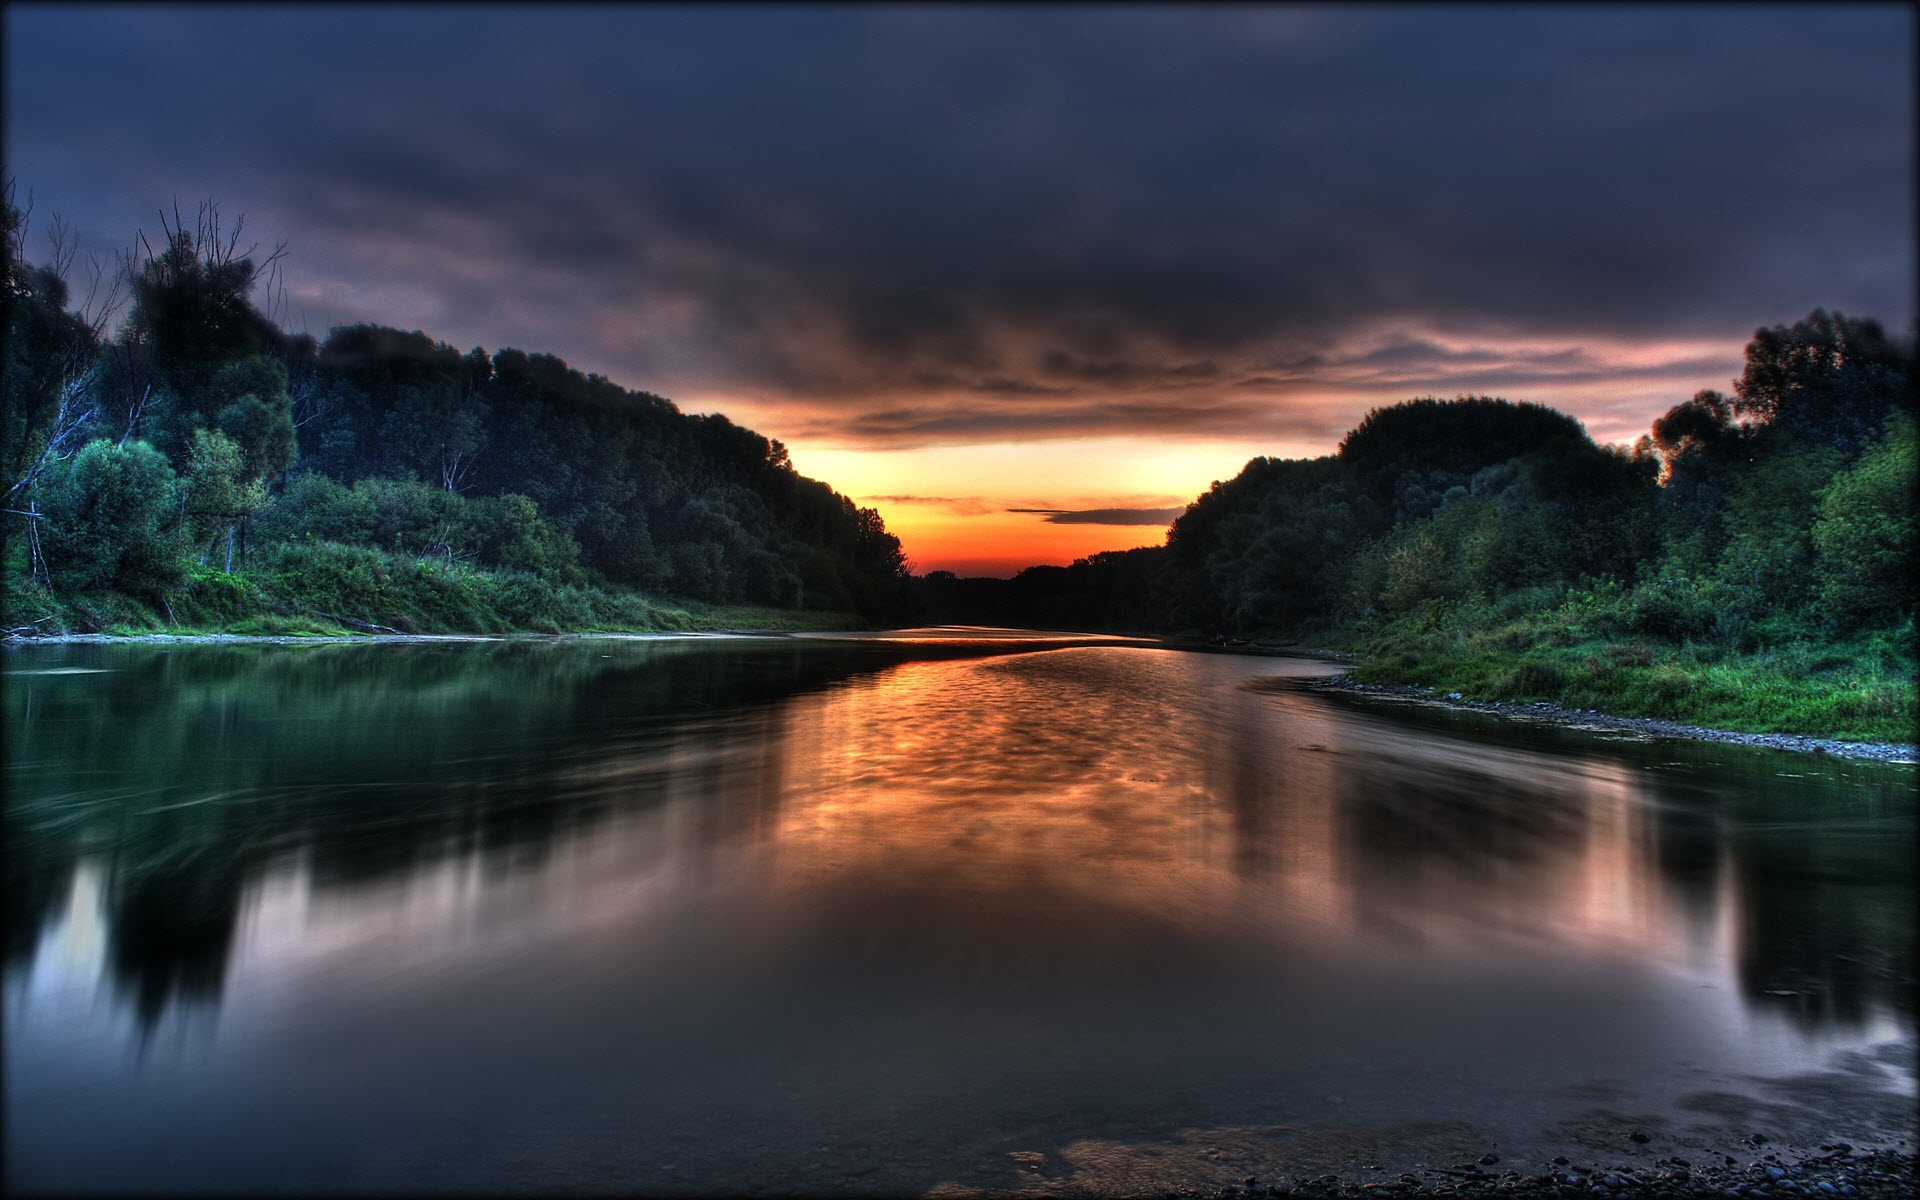 The sunset is reflected in the river